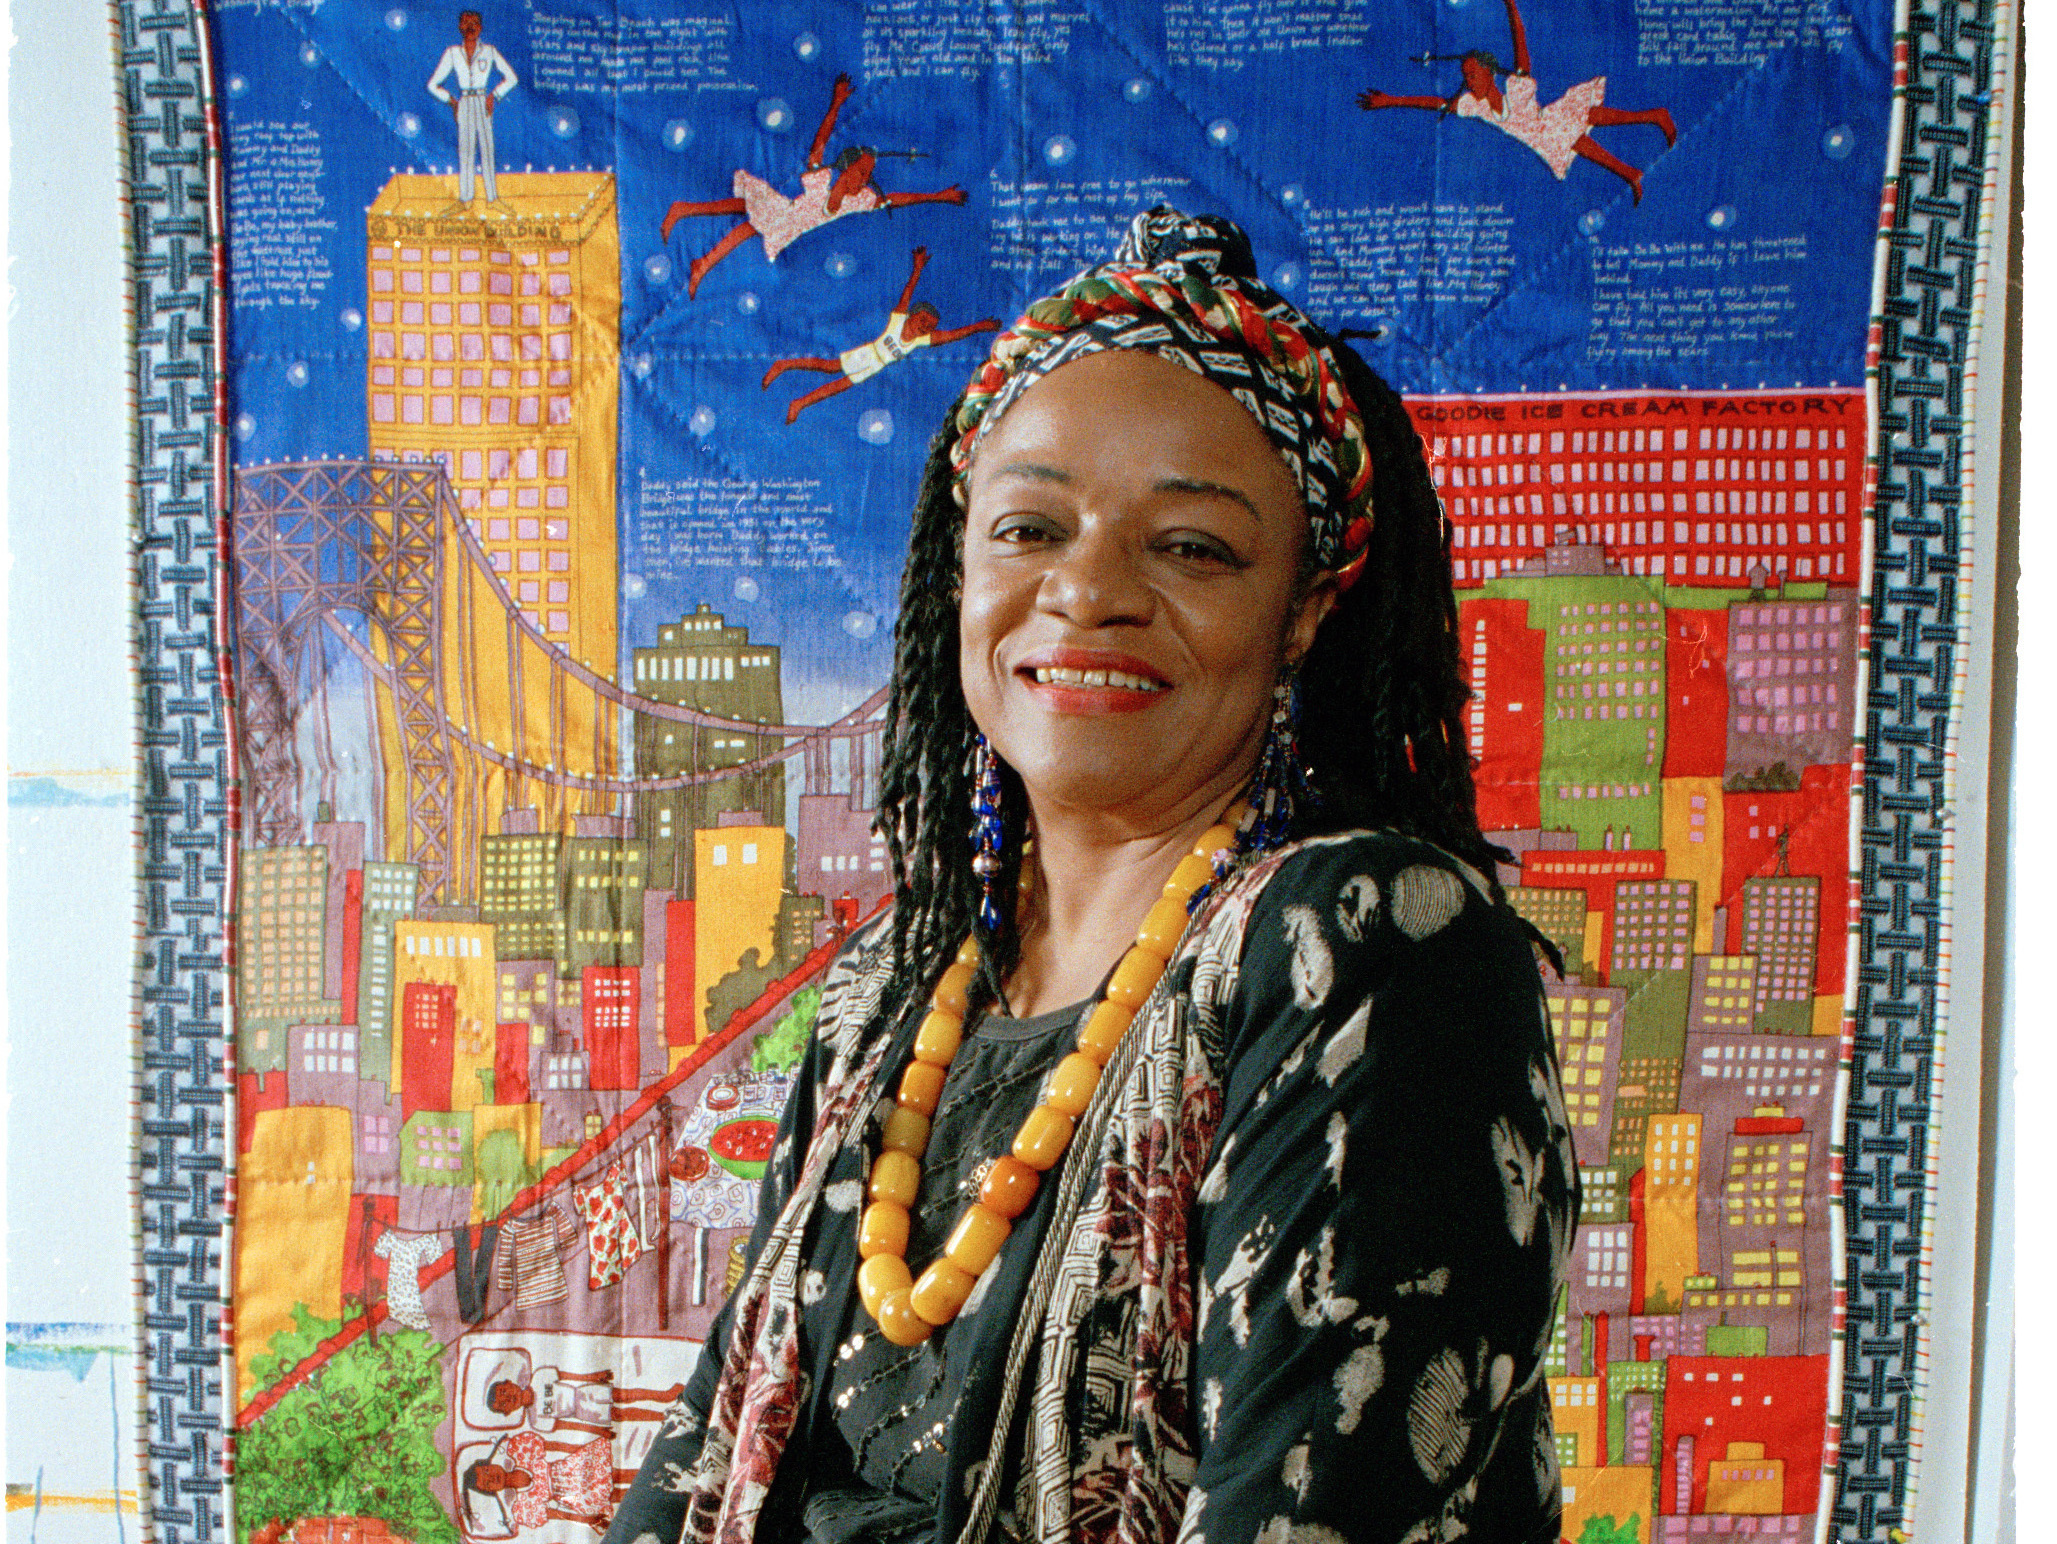 Artist Faith Ringgold sits before her quilt "Tar Beach" in 1993. The artwork also inspired a children's book of the same name.